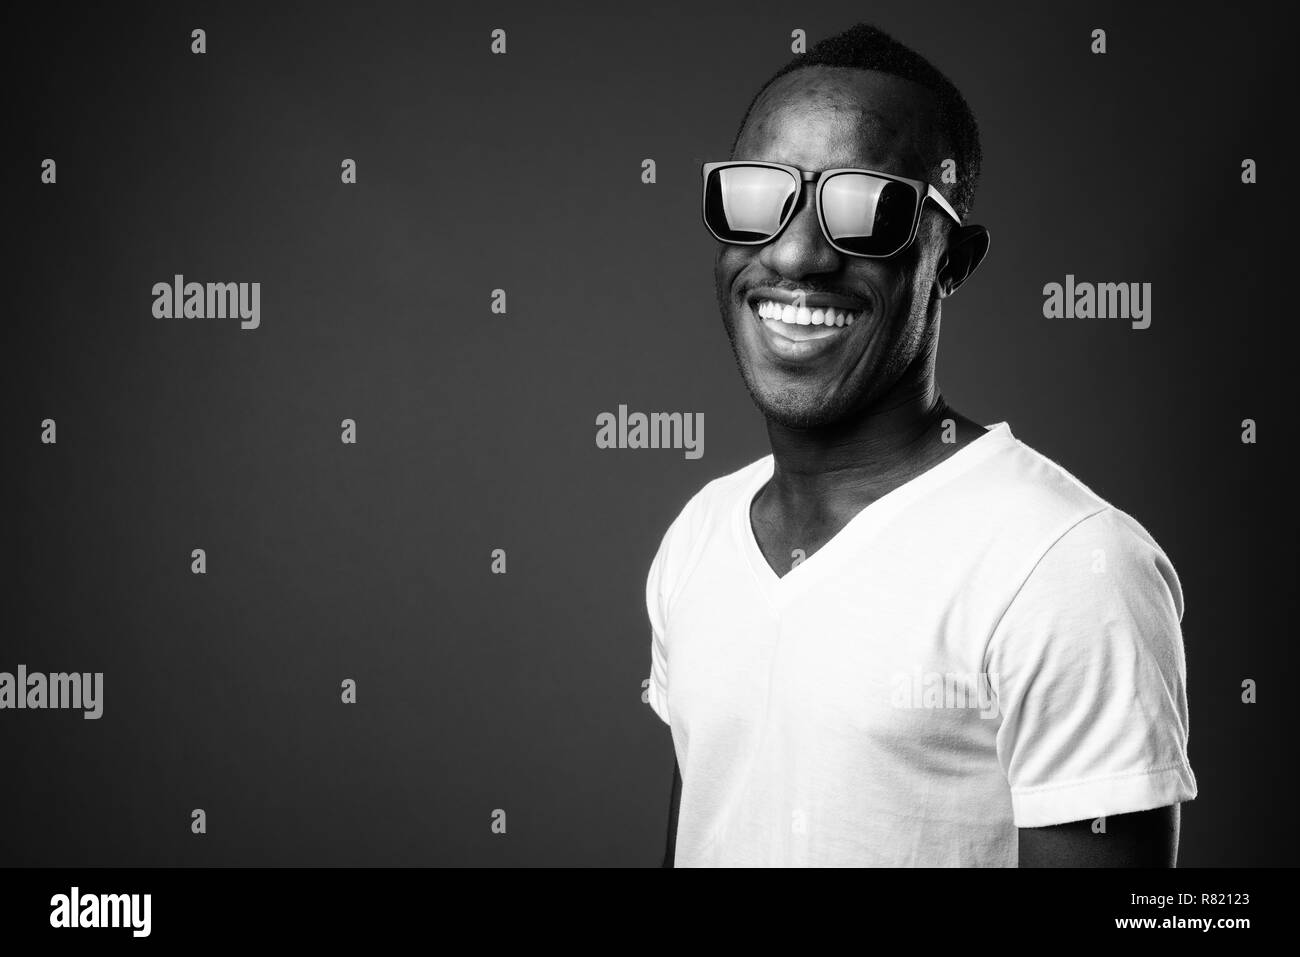 Young African man wearing Sunglasses and smiling Banque D'Images